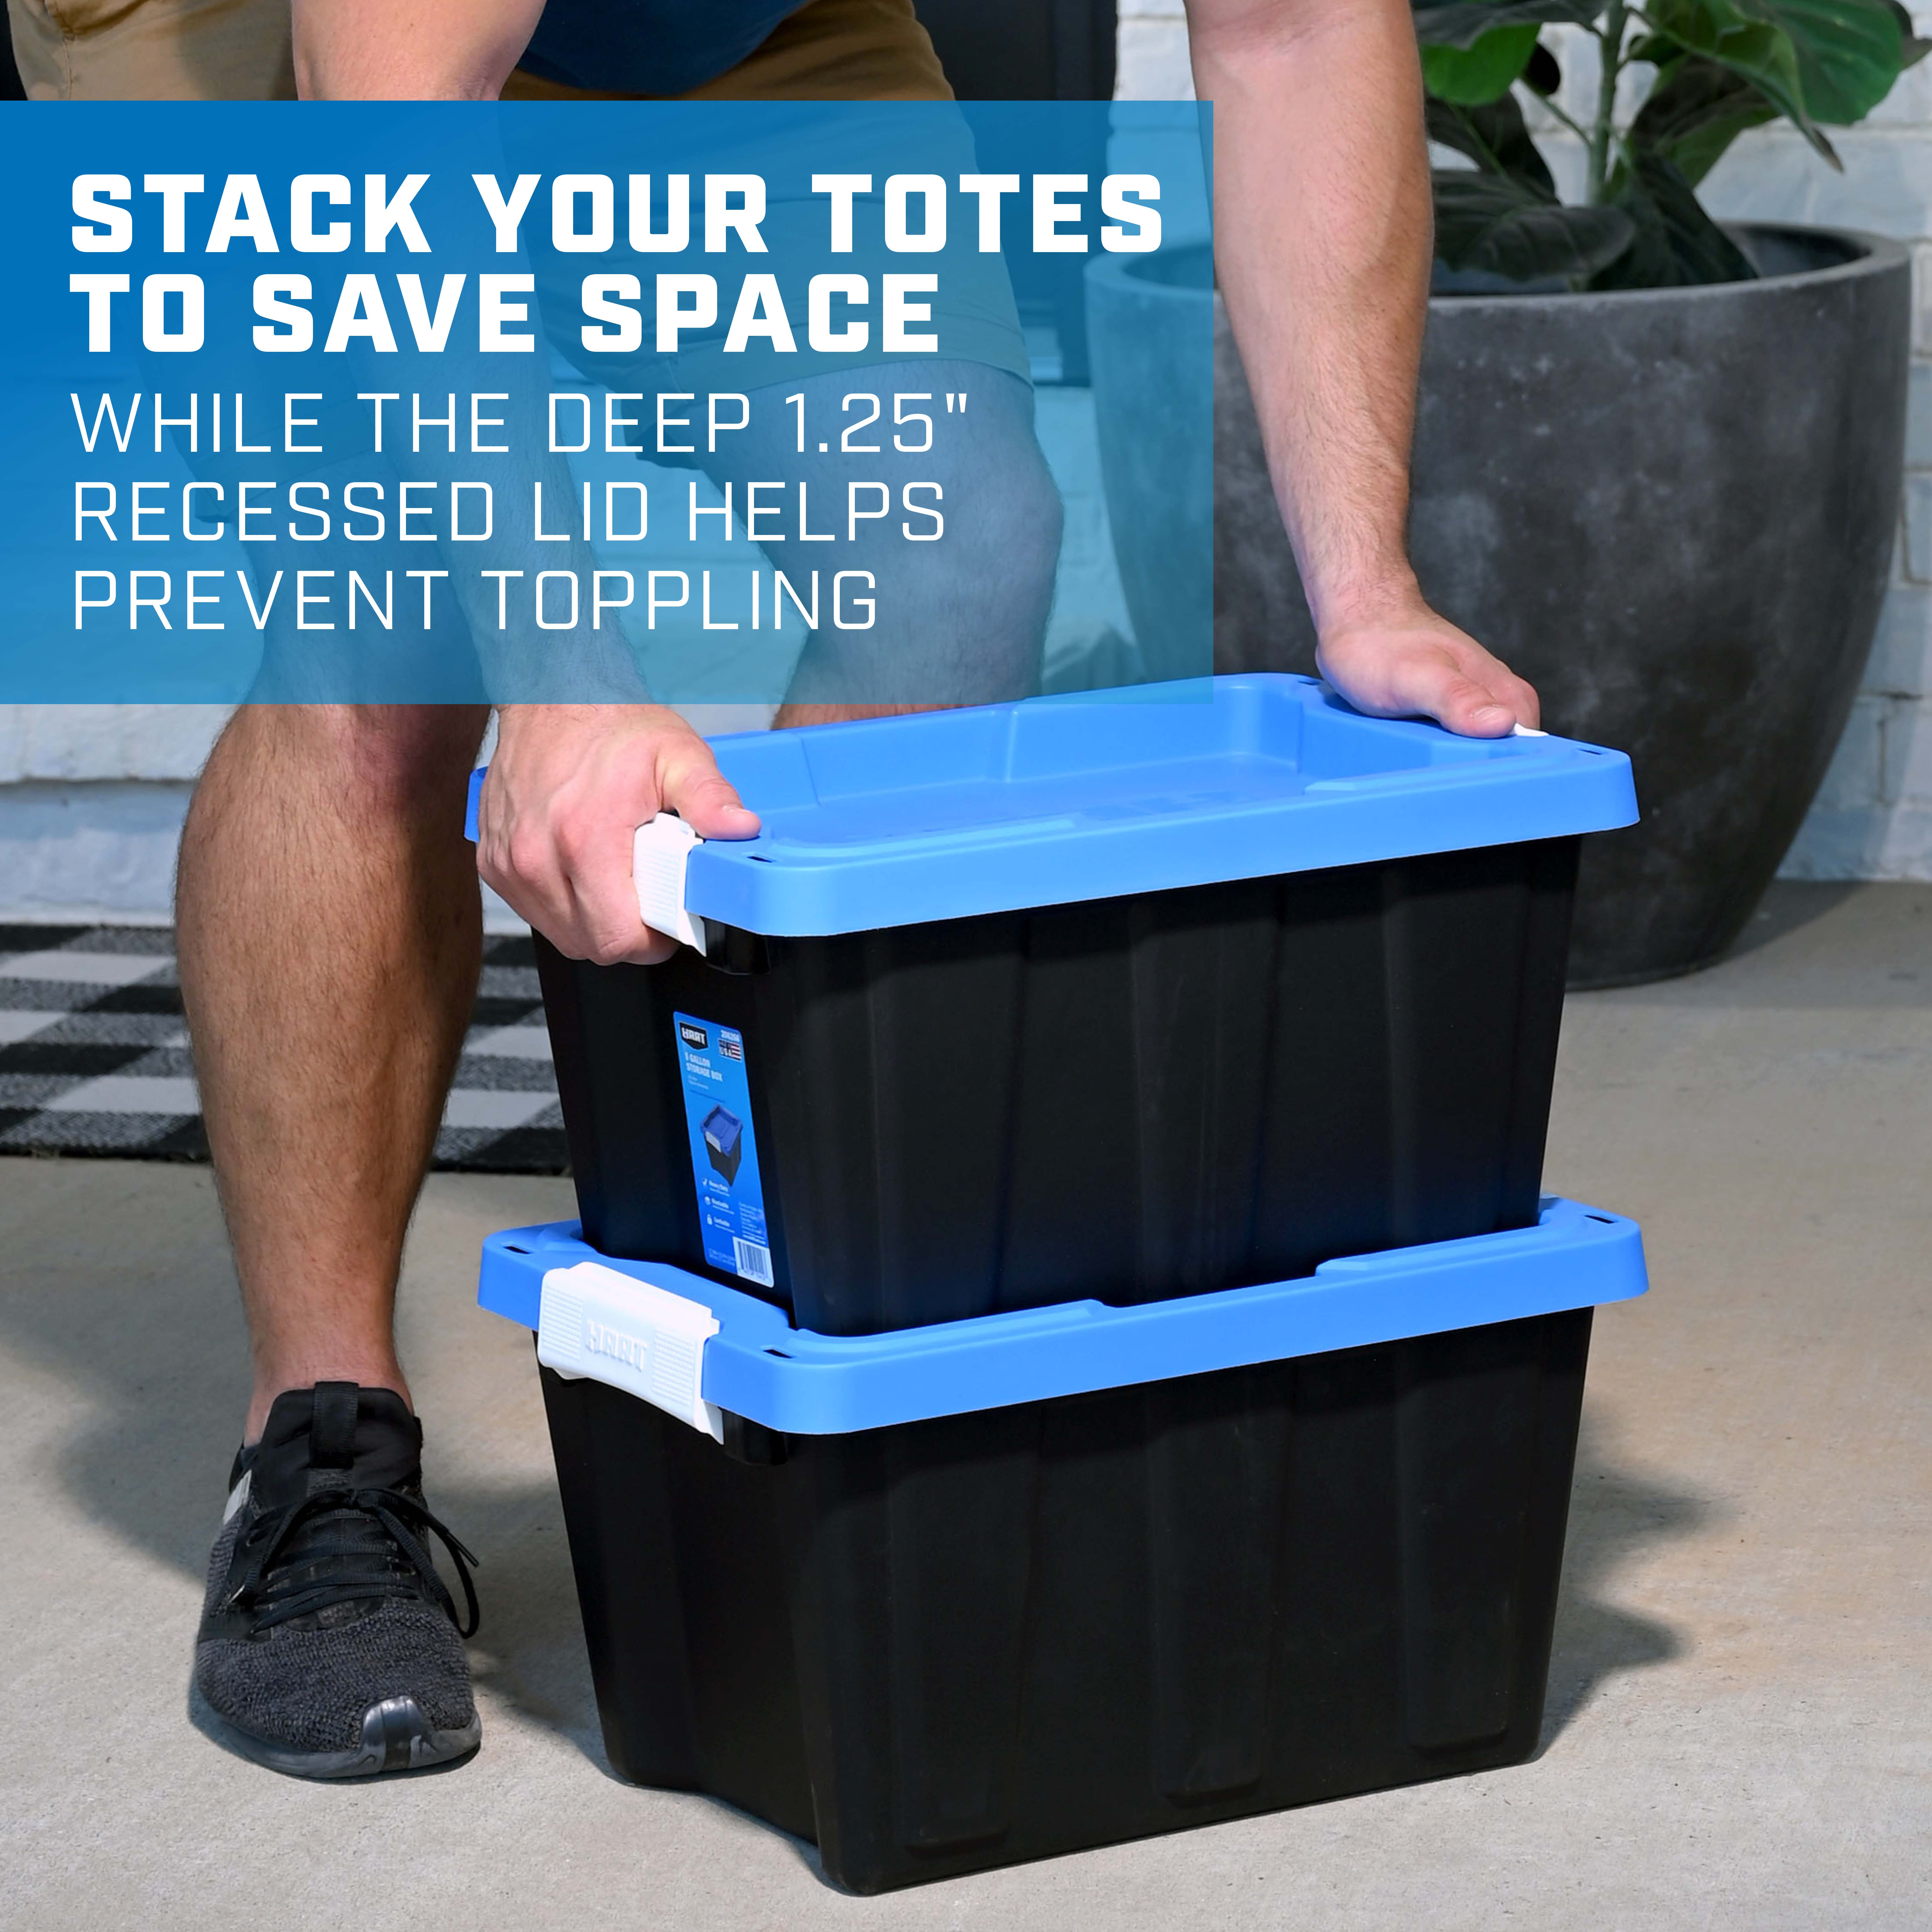 stack your totes to save space while the 1.25" recessed lid helps prevent toppling